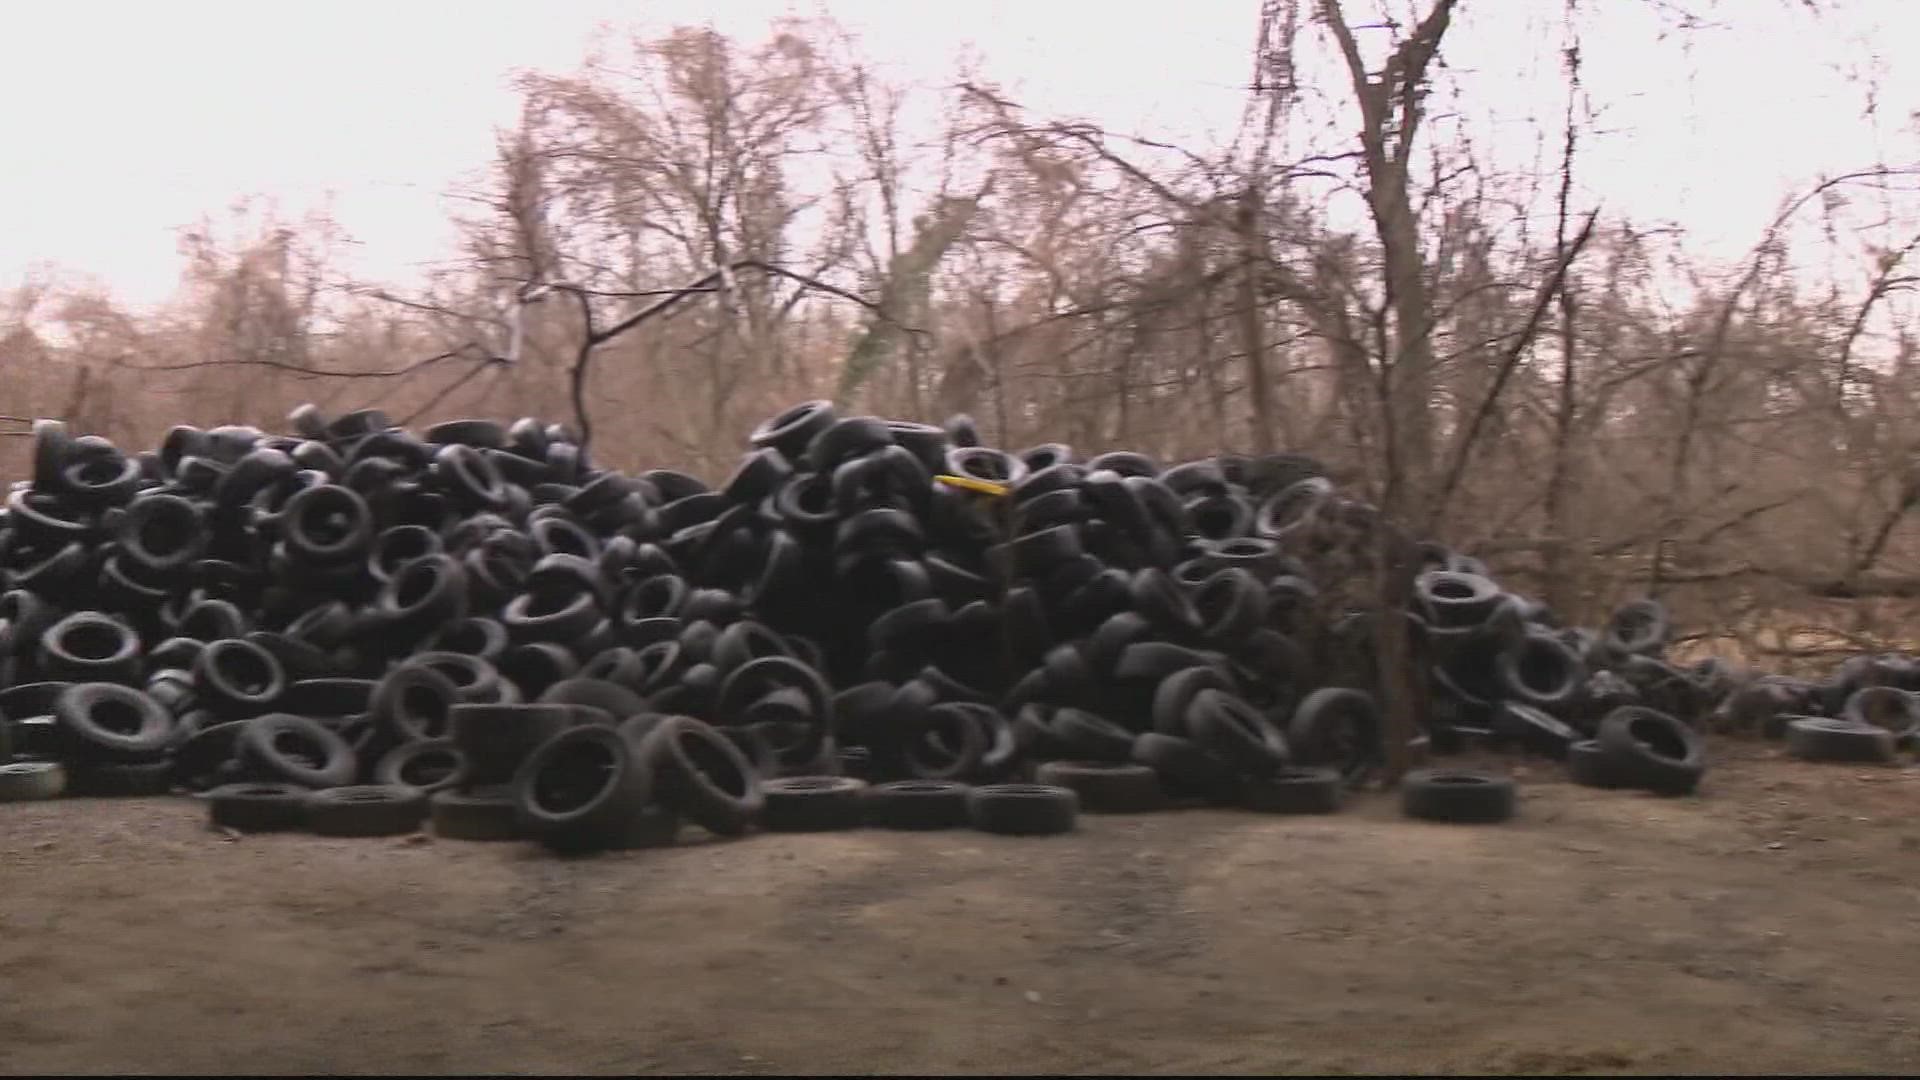 Community groups discovered a mountain of tires illegally dumped in Anacostia Park. Now, the National Park Service is working to clean them up.